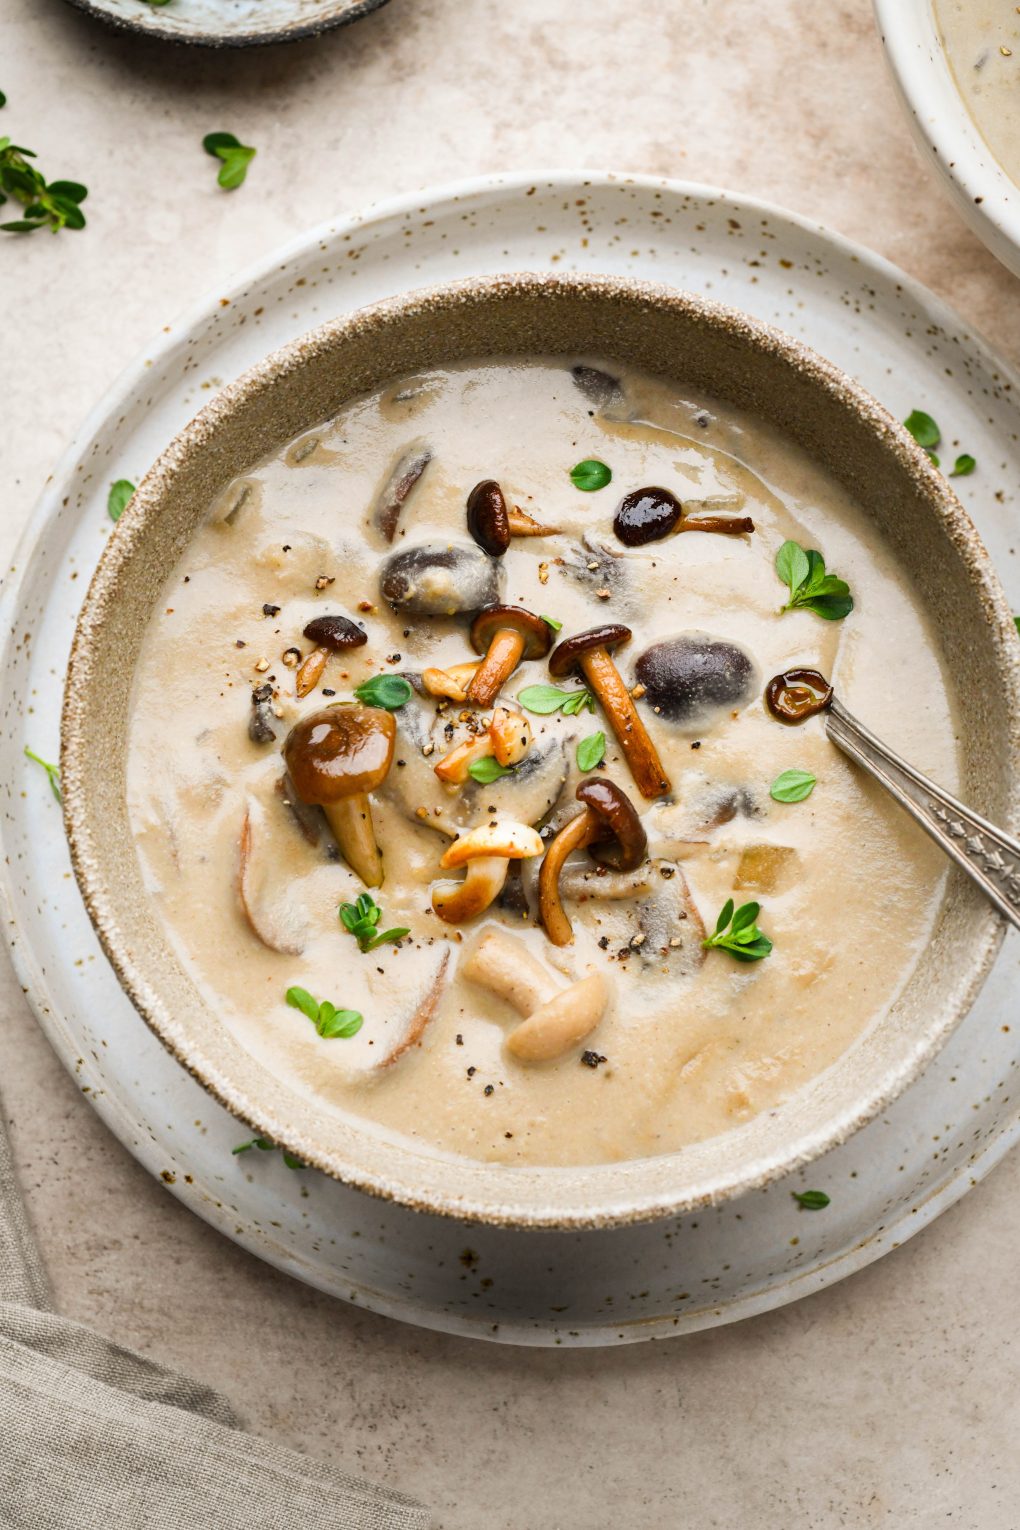 Super creamy homemade cream of mushroom soup in a rustic brown ceramic bowl. Topped with sautéed mushrooms and fresh herbs. 